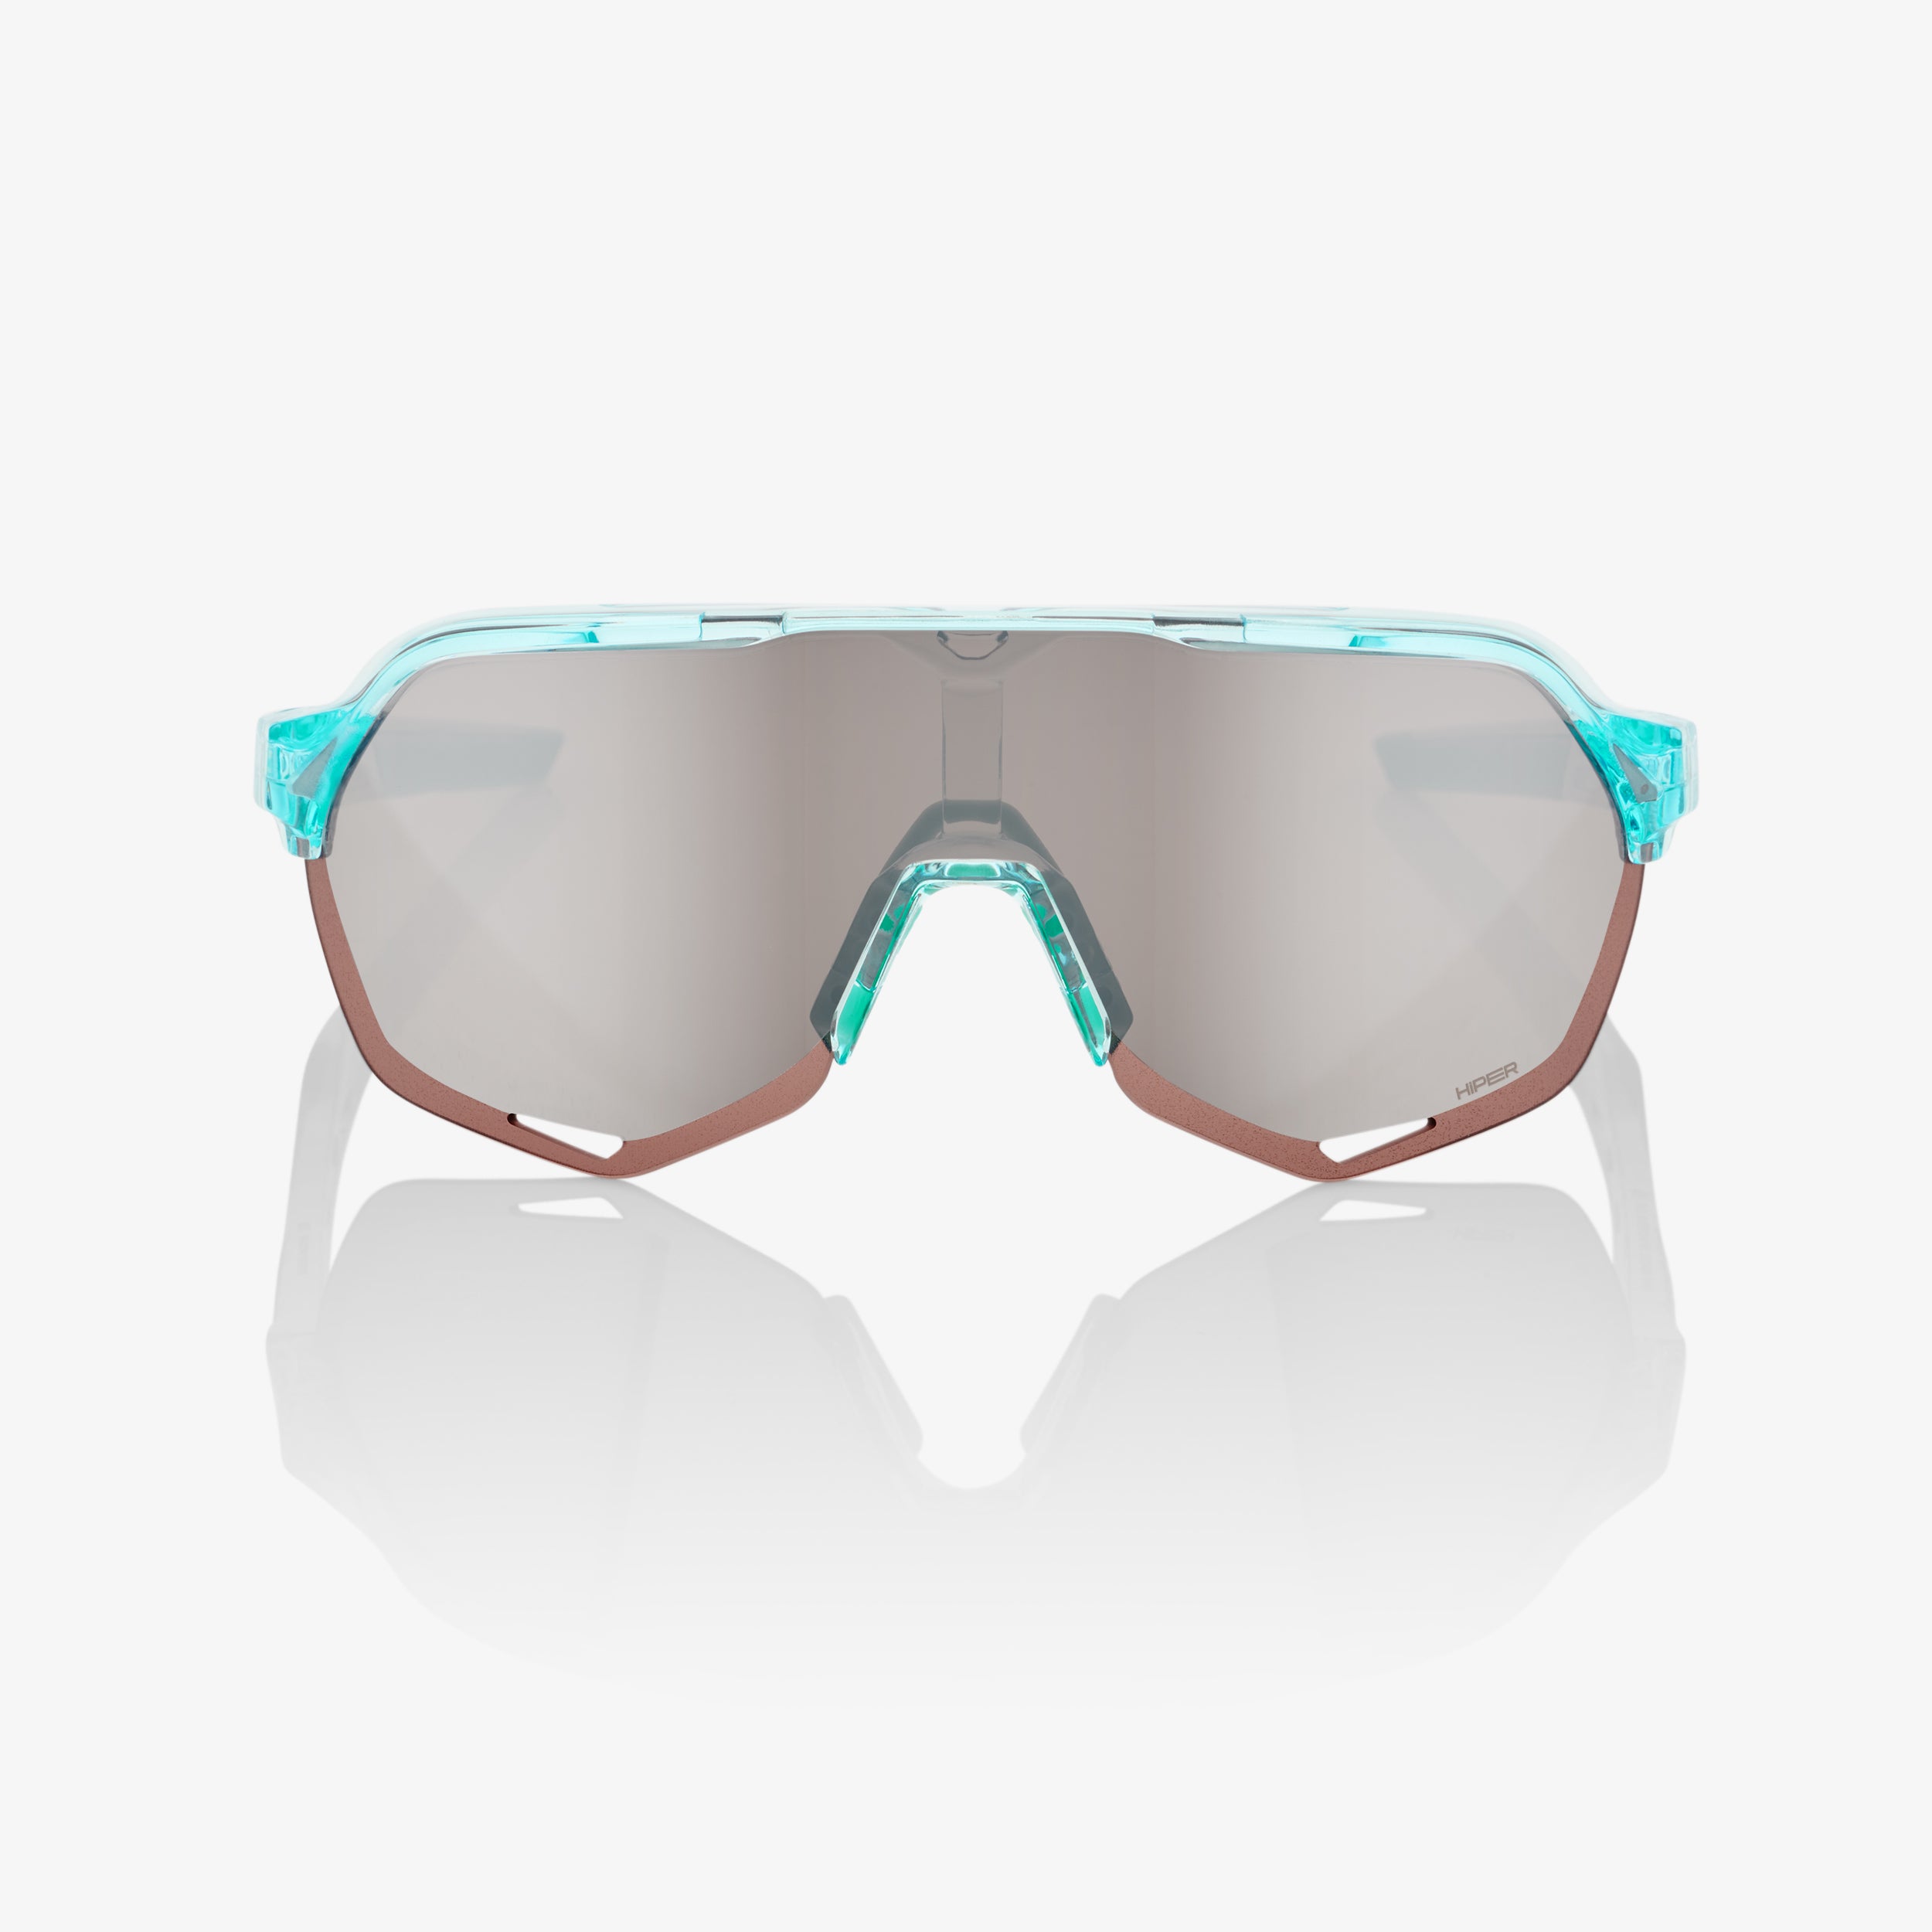 S2® - Polished Translucent Mint - HiPER® Silver Mirror Lens - Secondary